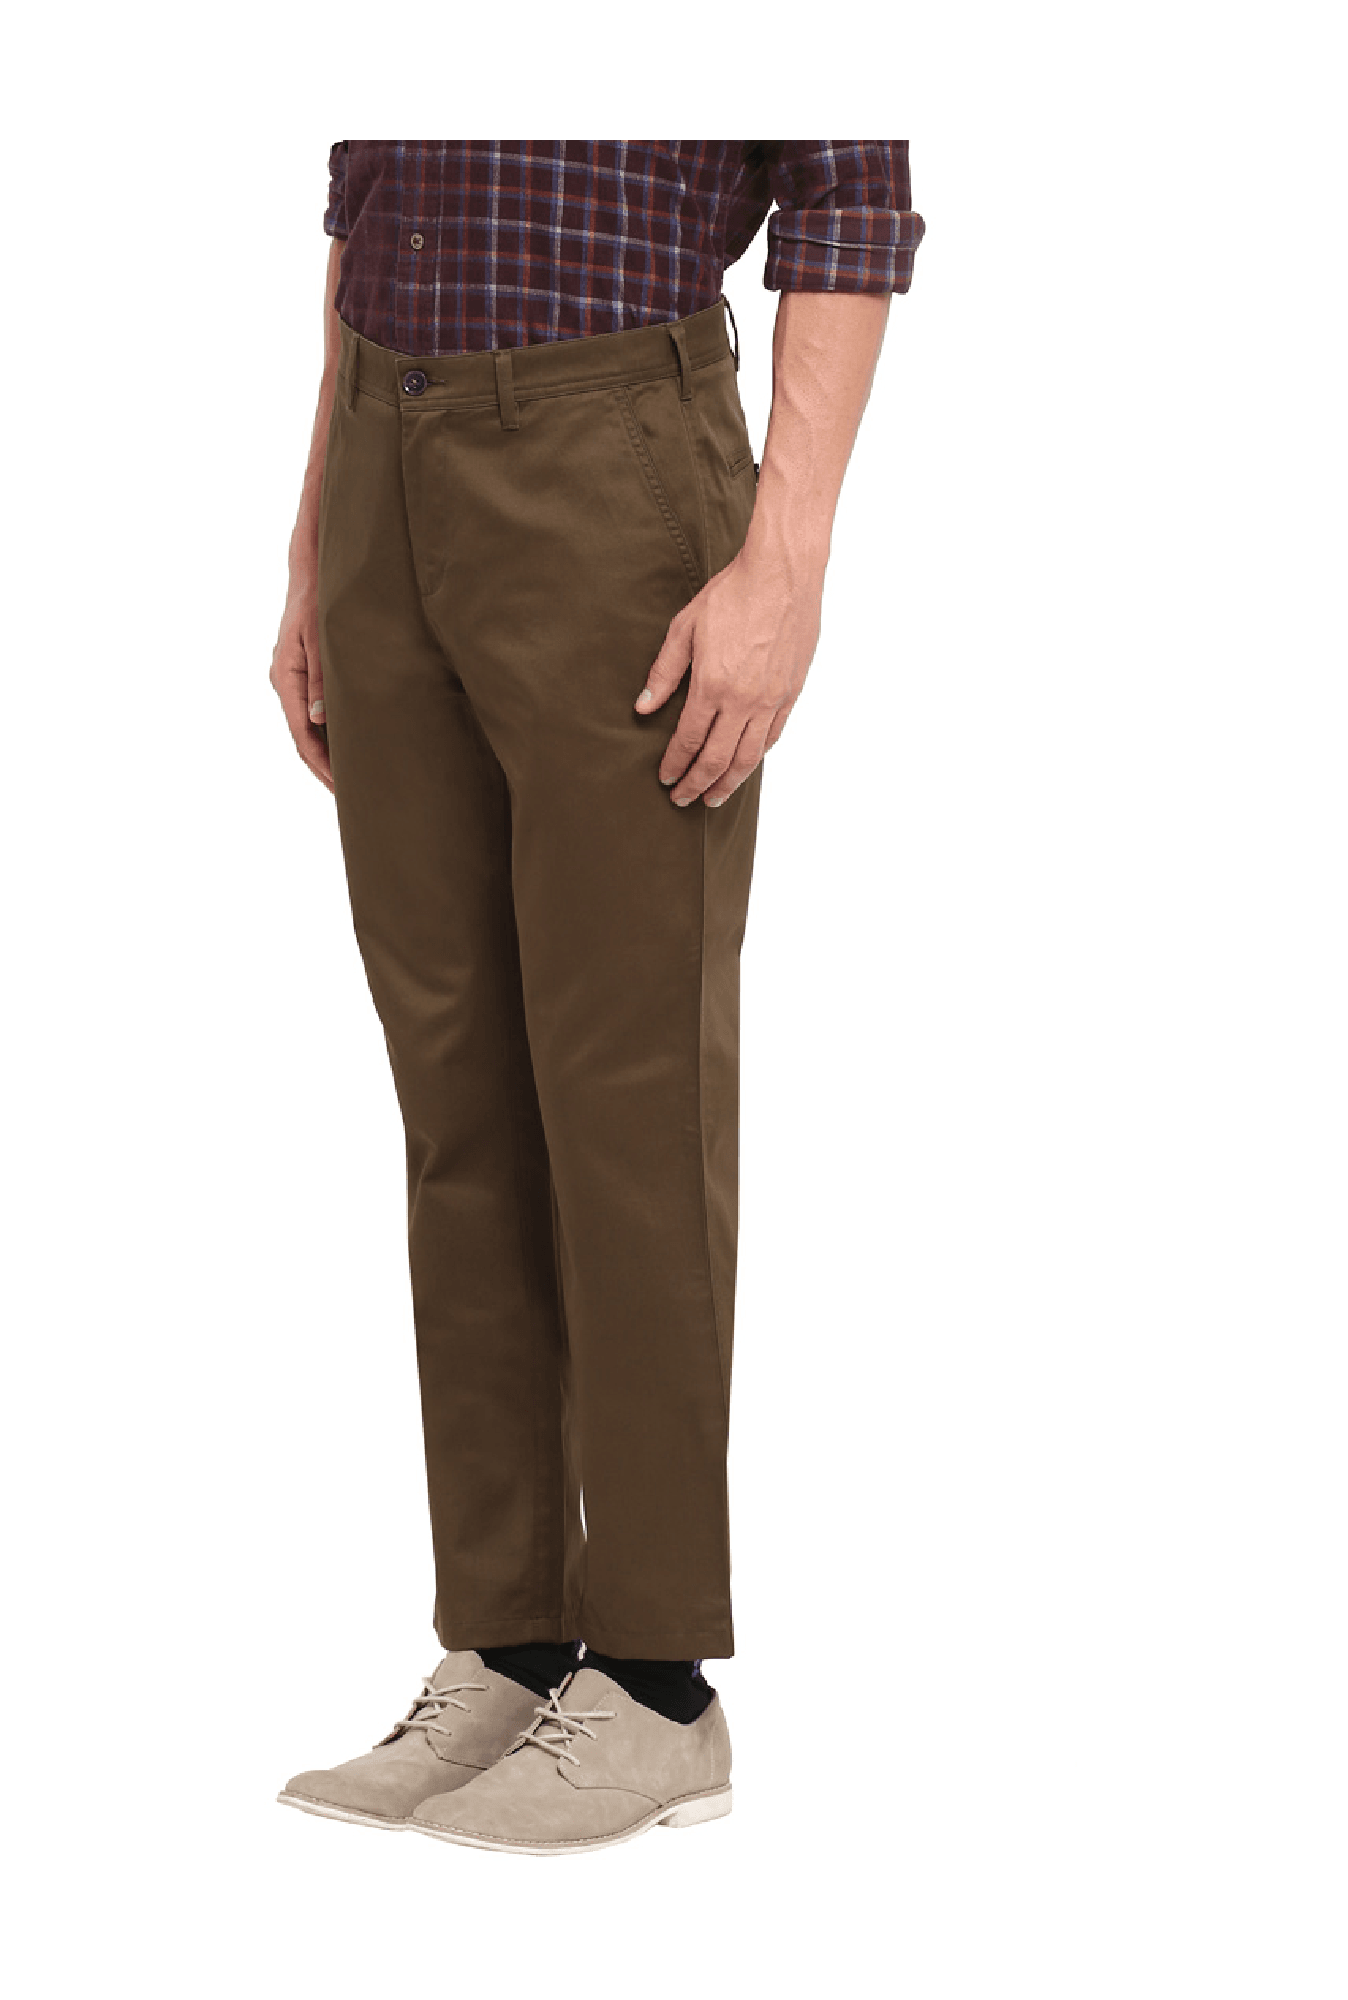 ColorPlus Formal Trousers  Buy ColorPlus Slim Fit Solid Green Trouser  Online  Nykaa Fashion